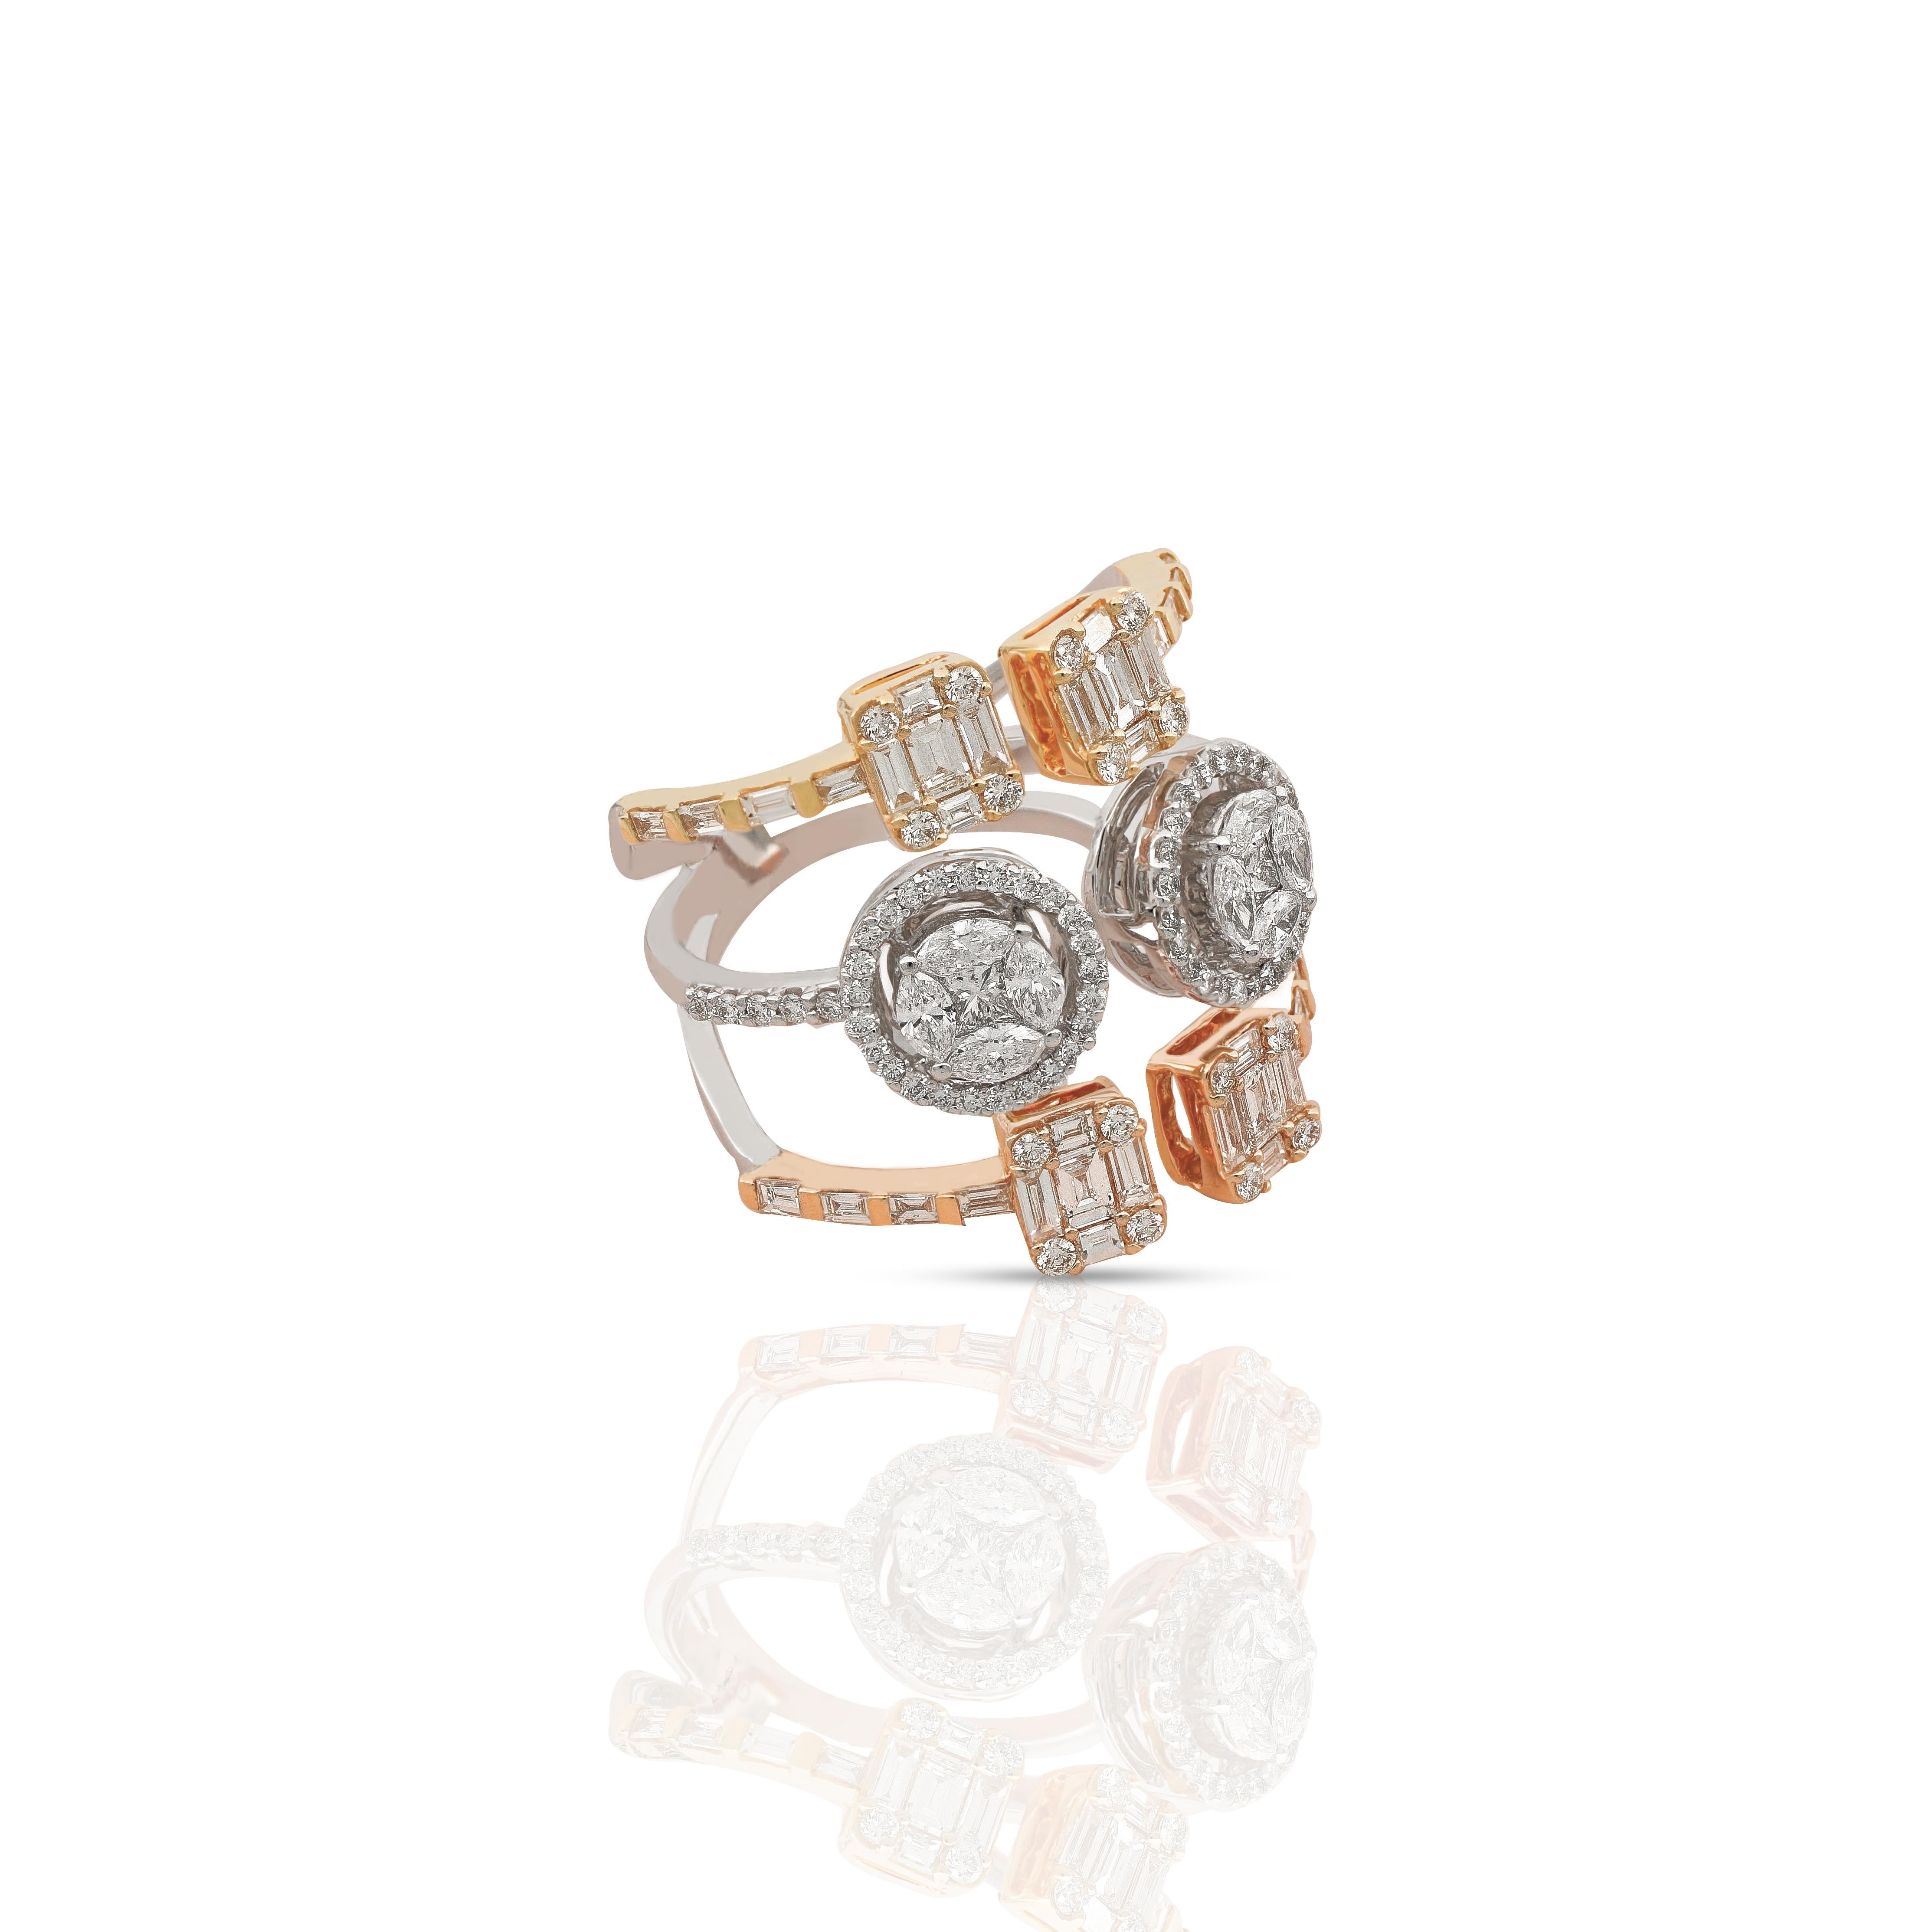 Sparkling streams of diamonds forming 3 multi-color layers in this 18 karat white gold ring. The striking design is emboldened by perfectly placed baguette diamond linked to bigger baguette cut diamonds that’s surrounded by small round diamonds. The